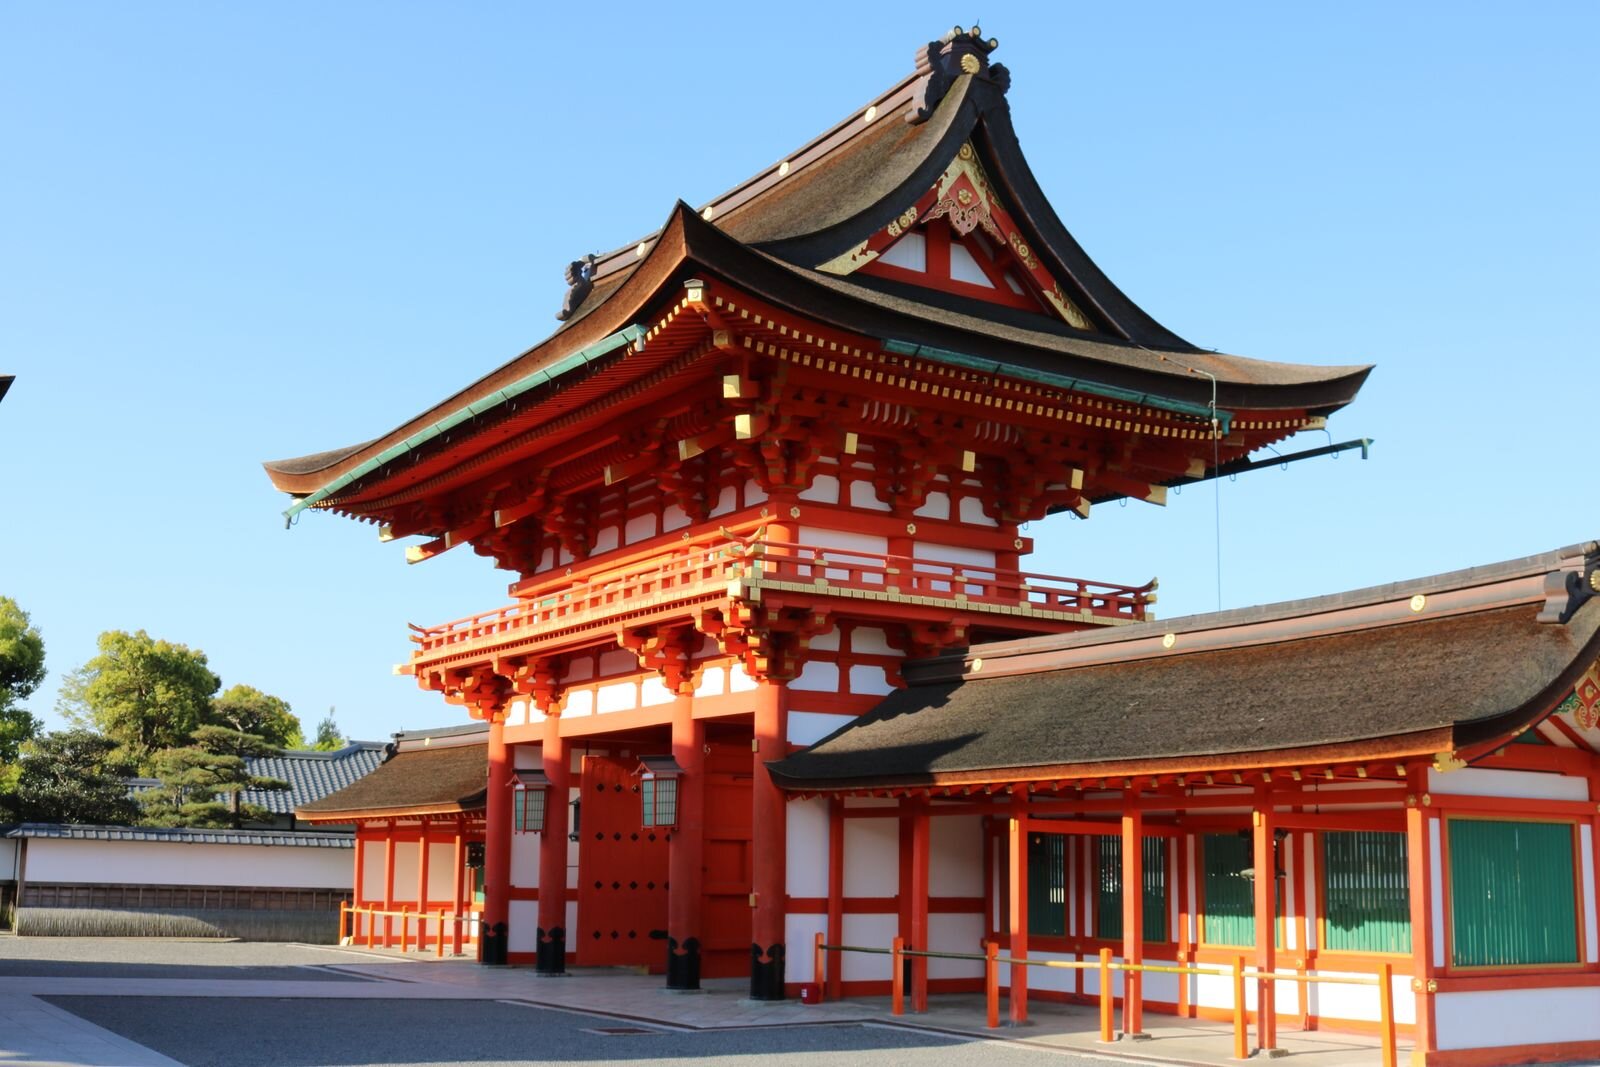 The large orange gate at entrance of a shrine in Kyoto